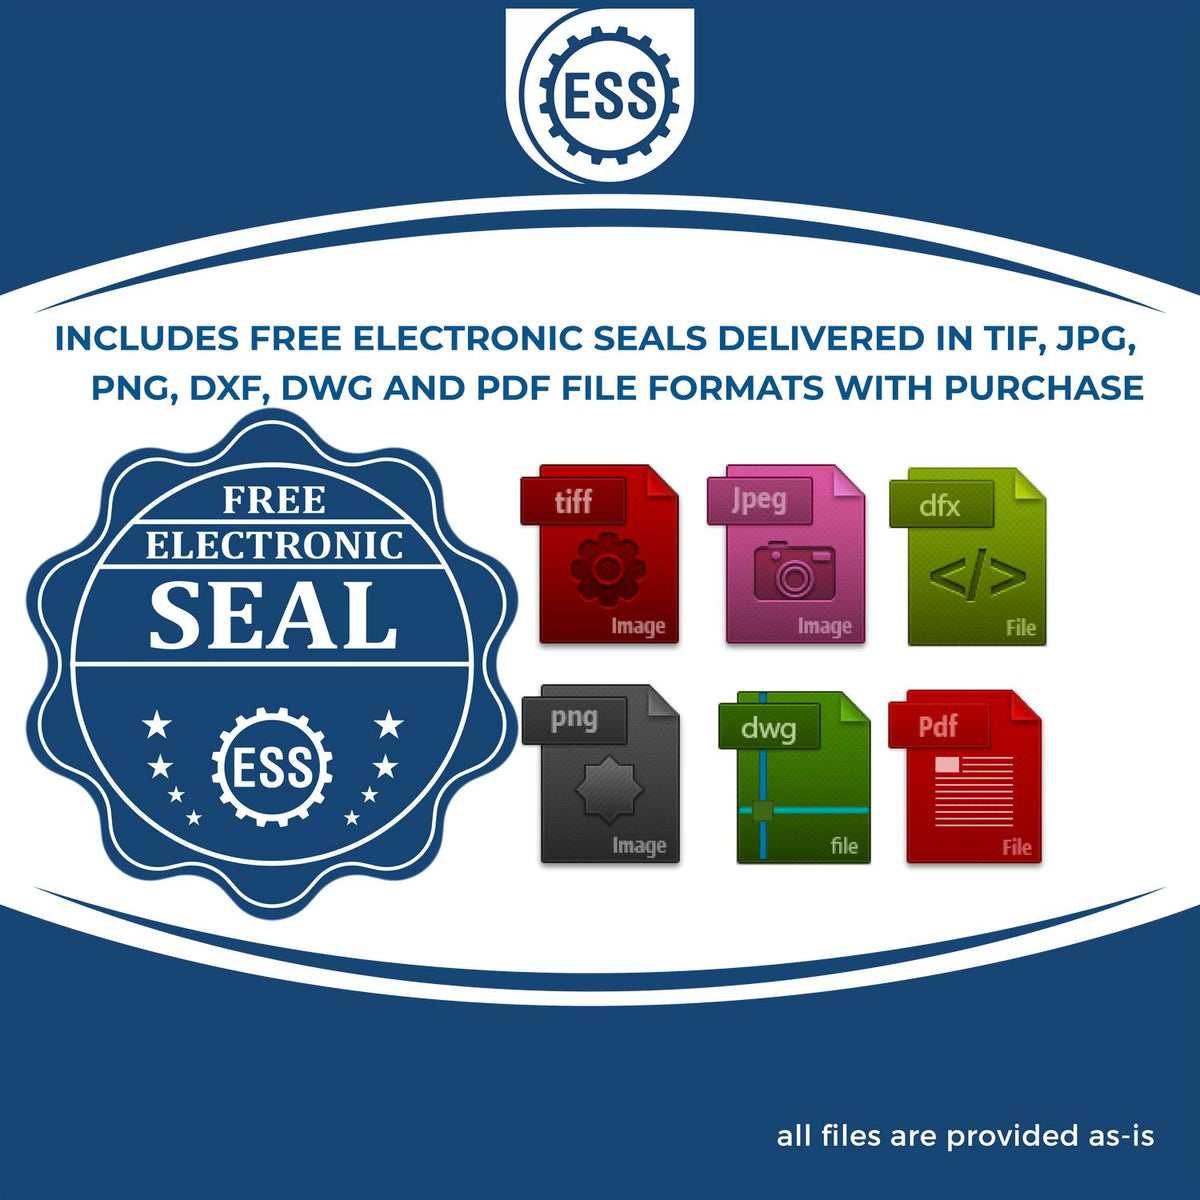 An infographic for the free electronic seal for the Long Reach Mississippi Geology Seal illustrating the different file type icons such as DXF, DWG, TIF, JPG and PNG.